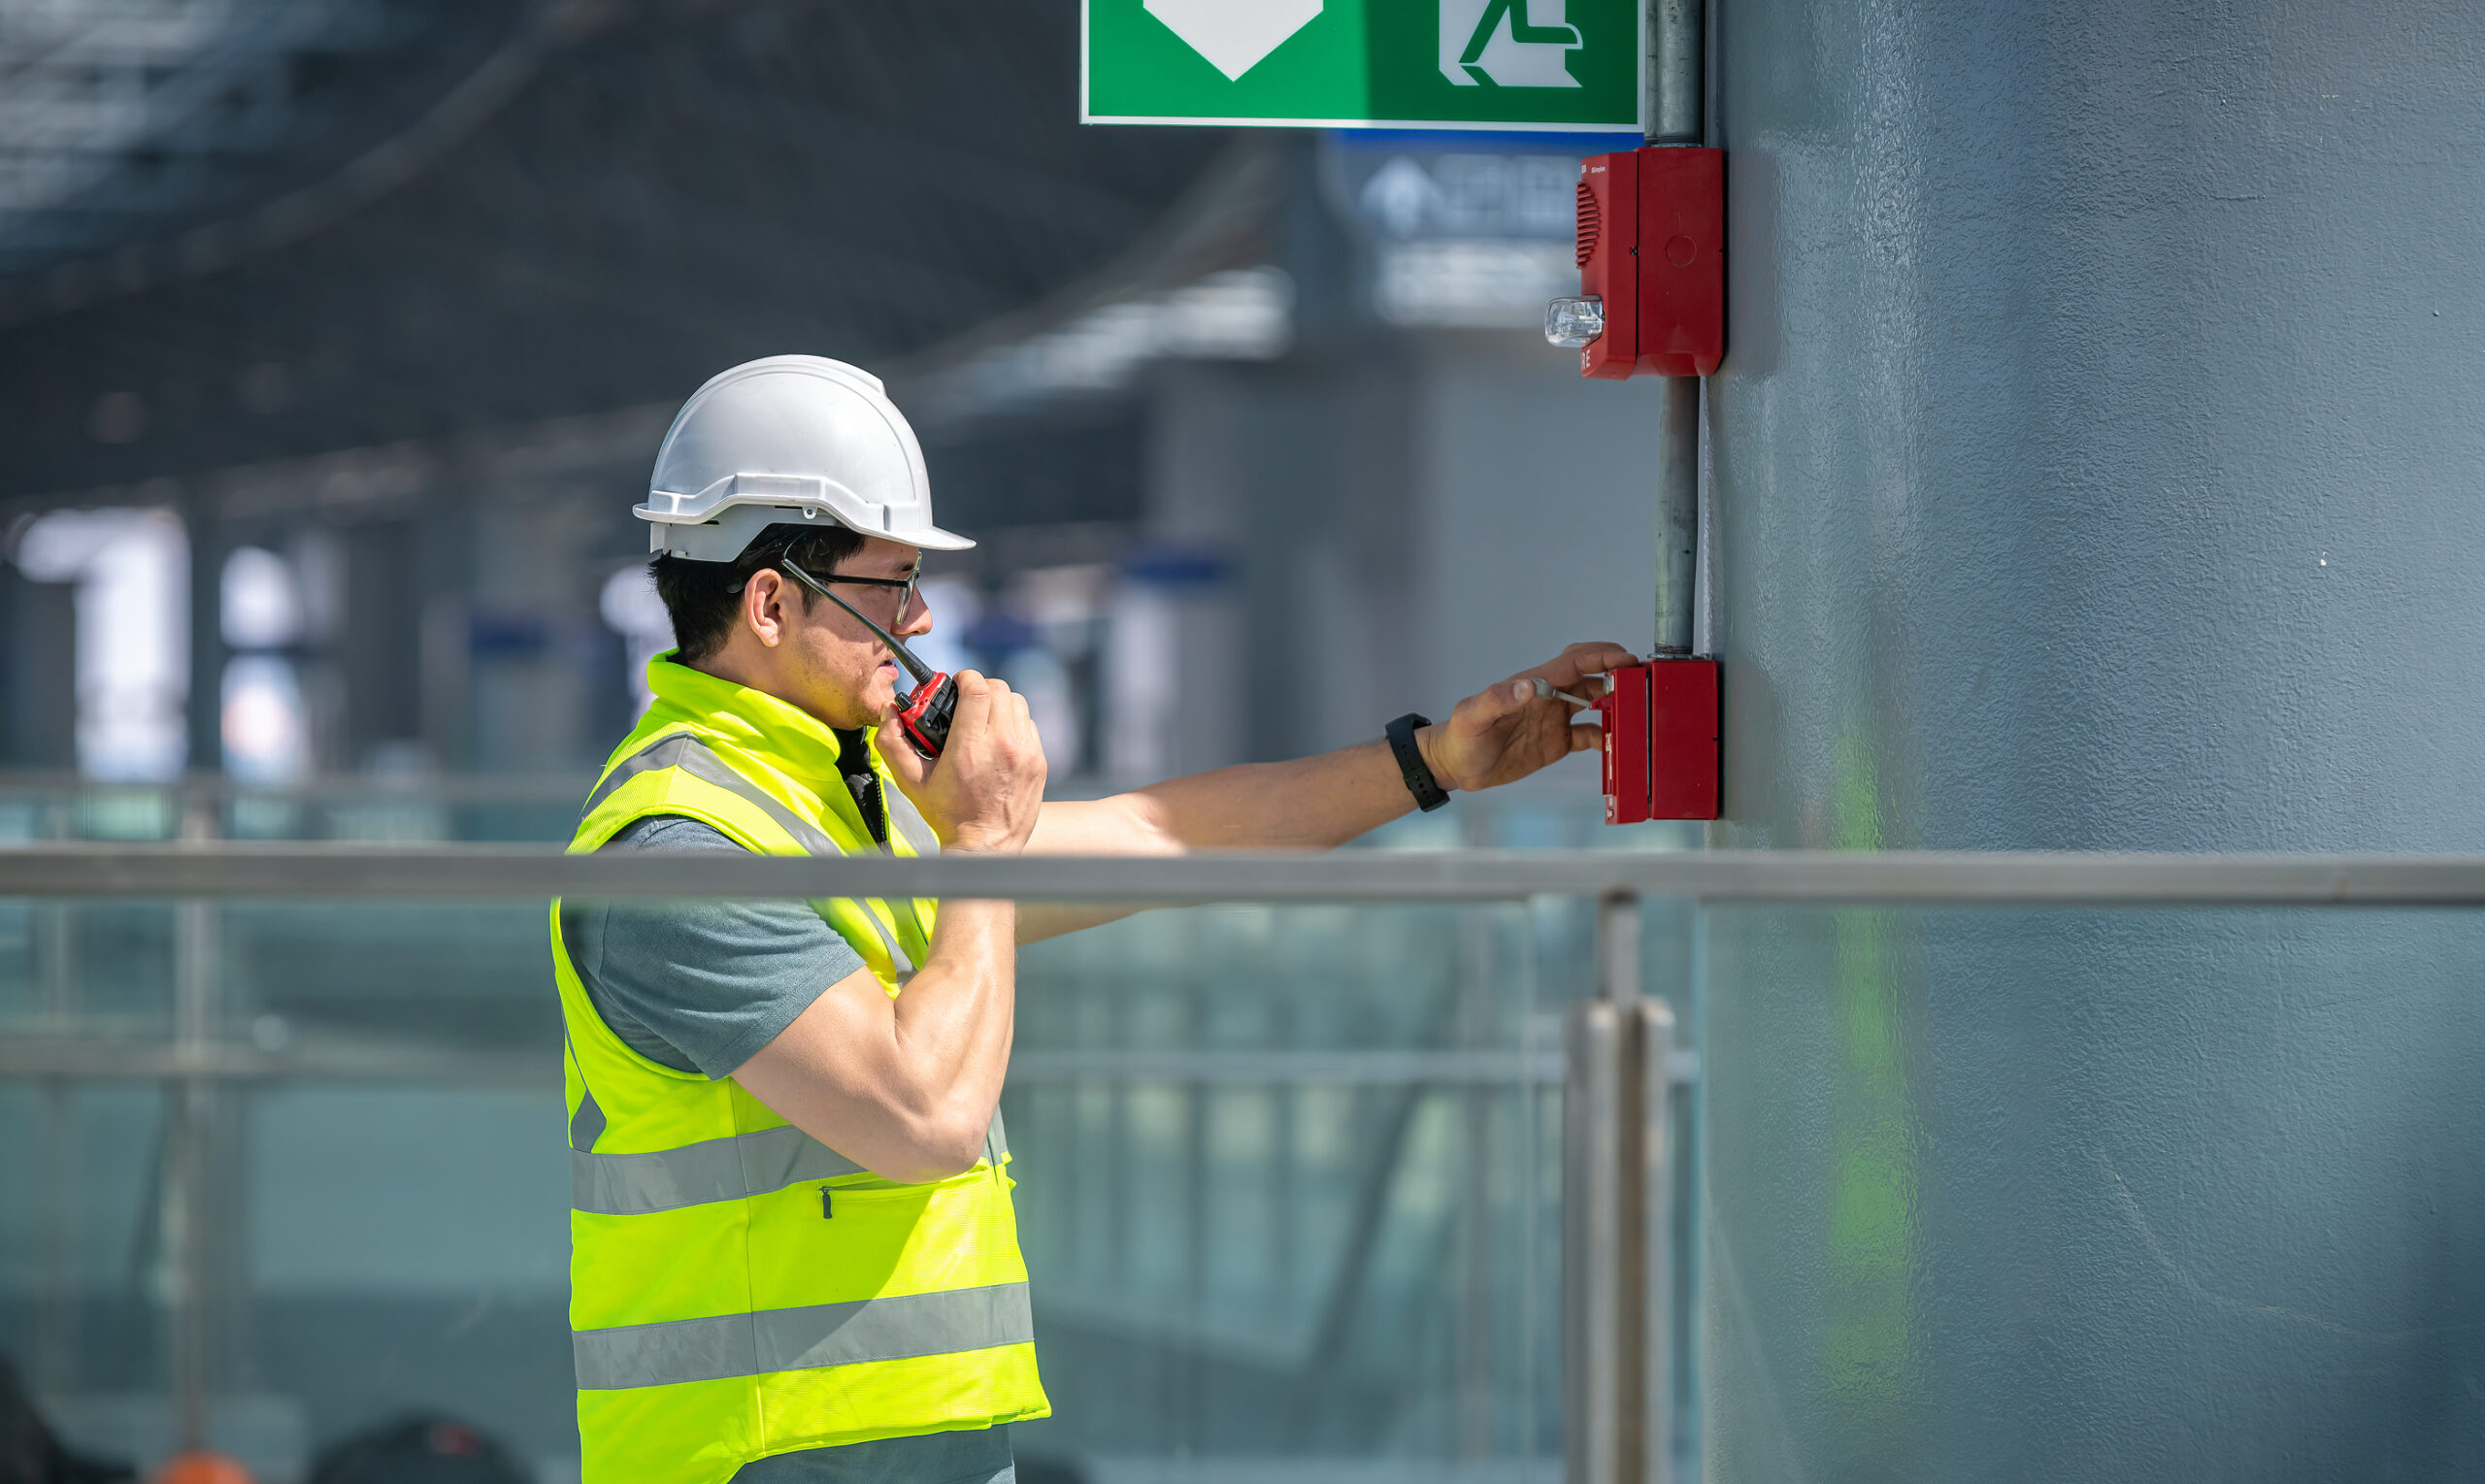 Temporary Staffing Industry – Workplace Fire Risks